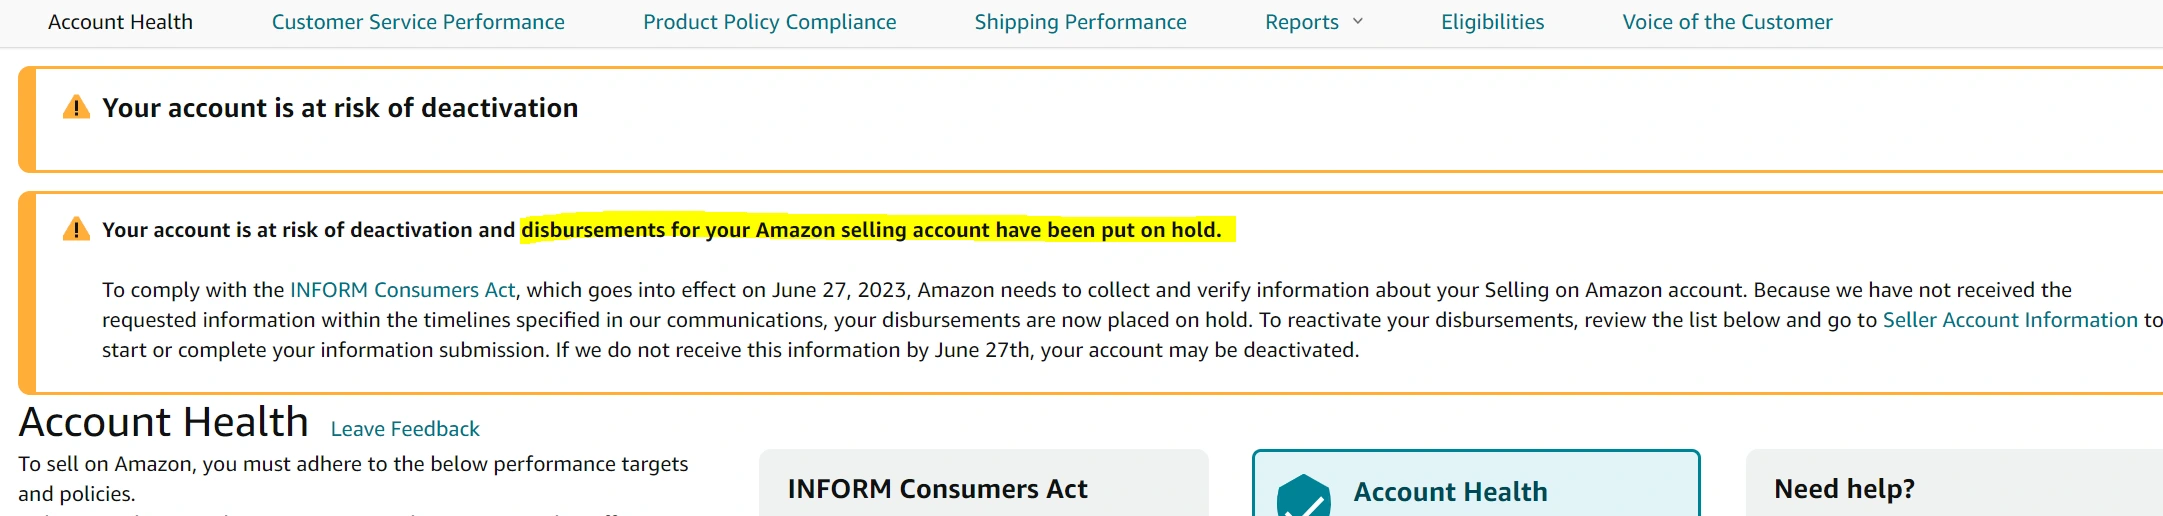 disbursements of your Amazon selling account have been put on hold notification 